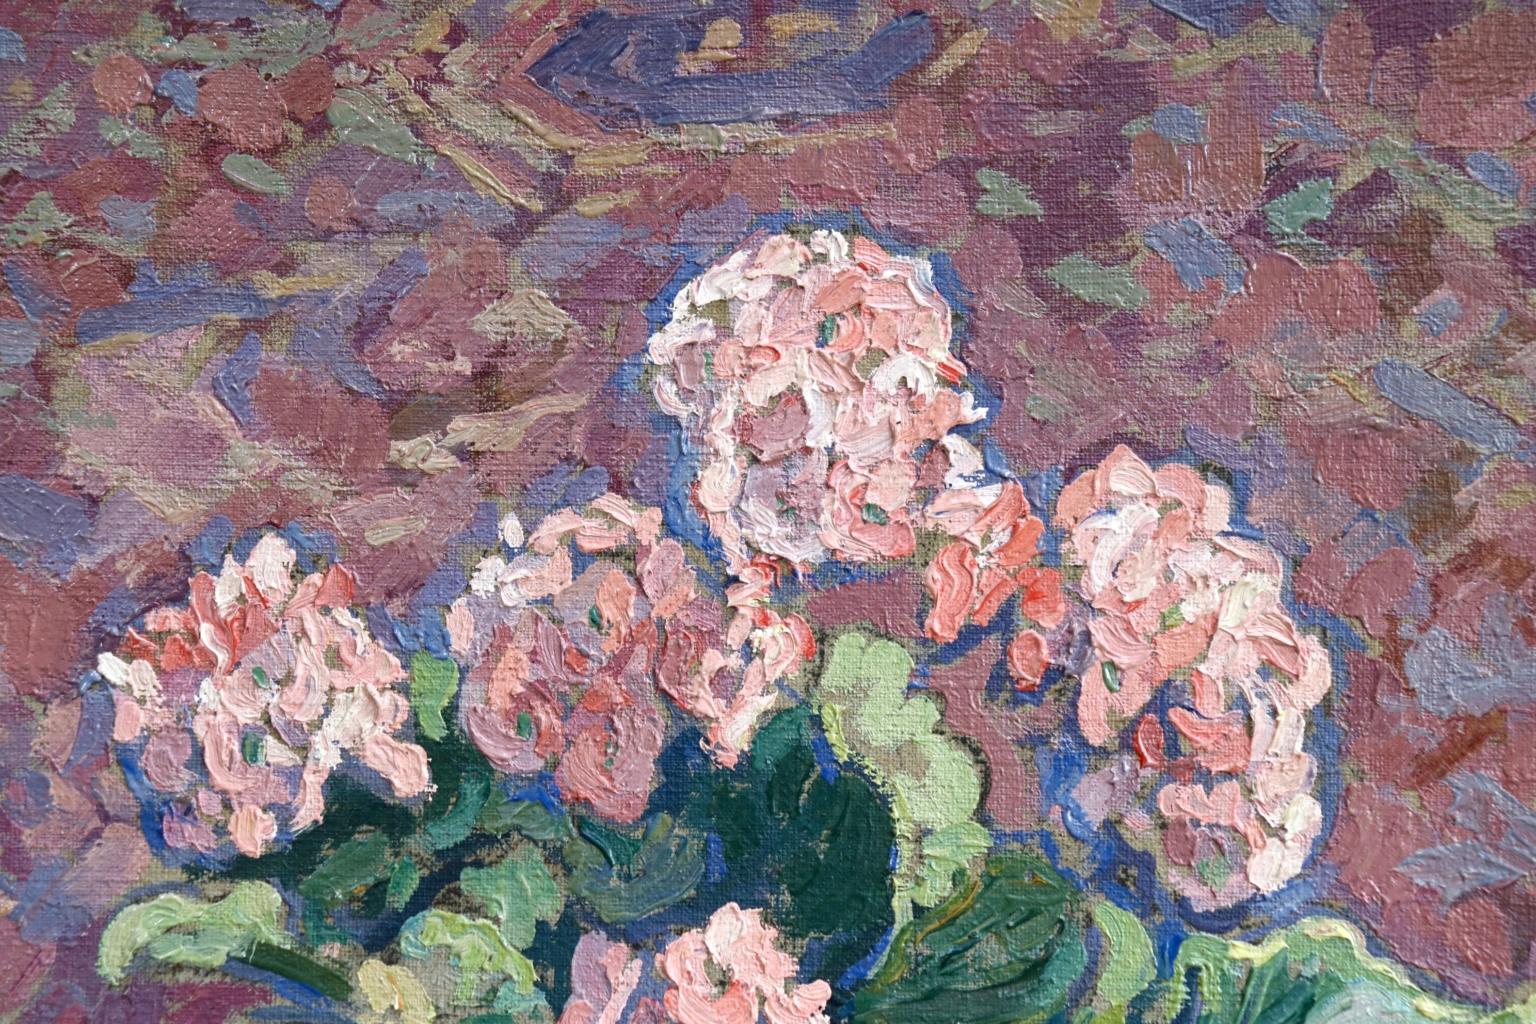 A beautifully coloured oil on canvas circa 1950 by French Post-Impressionist painter Jacques Martin-Ferrieres. The piece depicts a primrose plant with delicate pink flowers in a purple planter on a patterned rug. Signed lower right and titled verso.